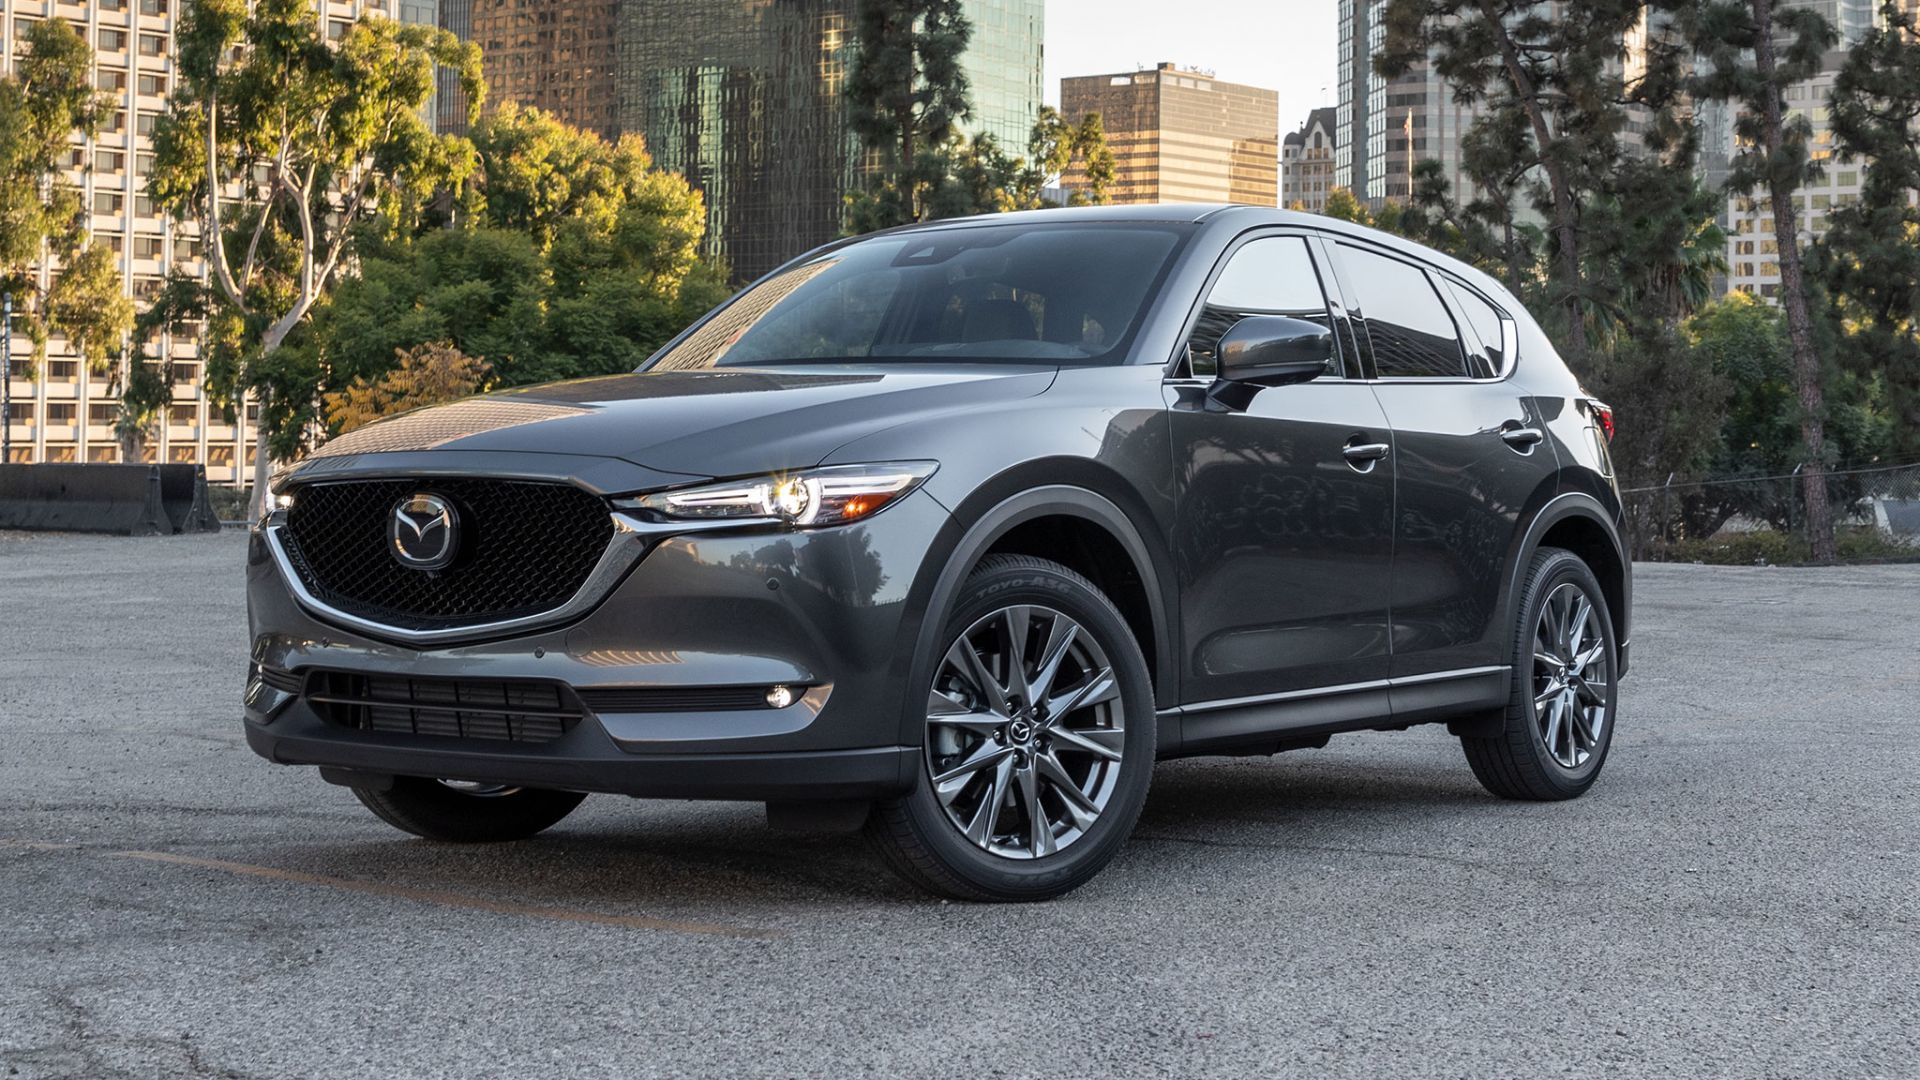 2021 Mazda CX-5 vs 2021 Nissan Rogue : The CX-5 combines performance and value like no other